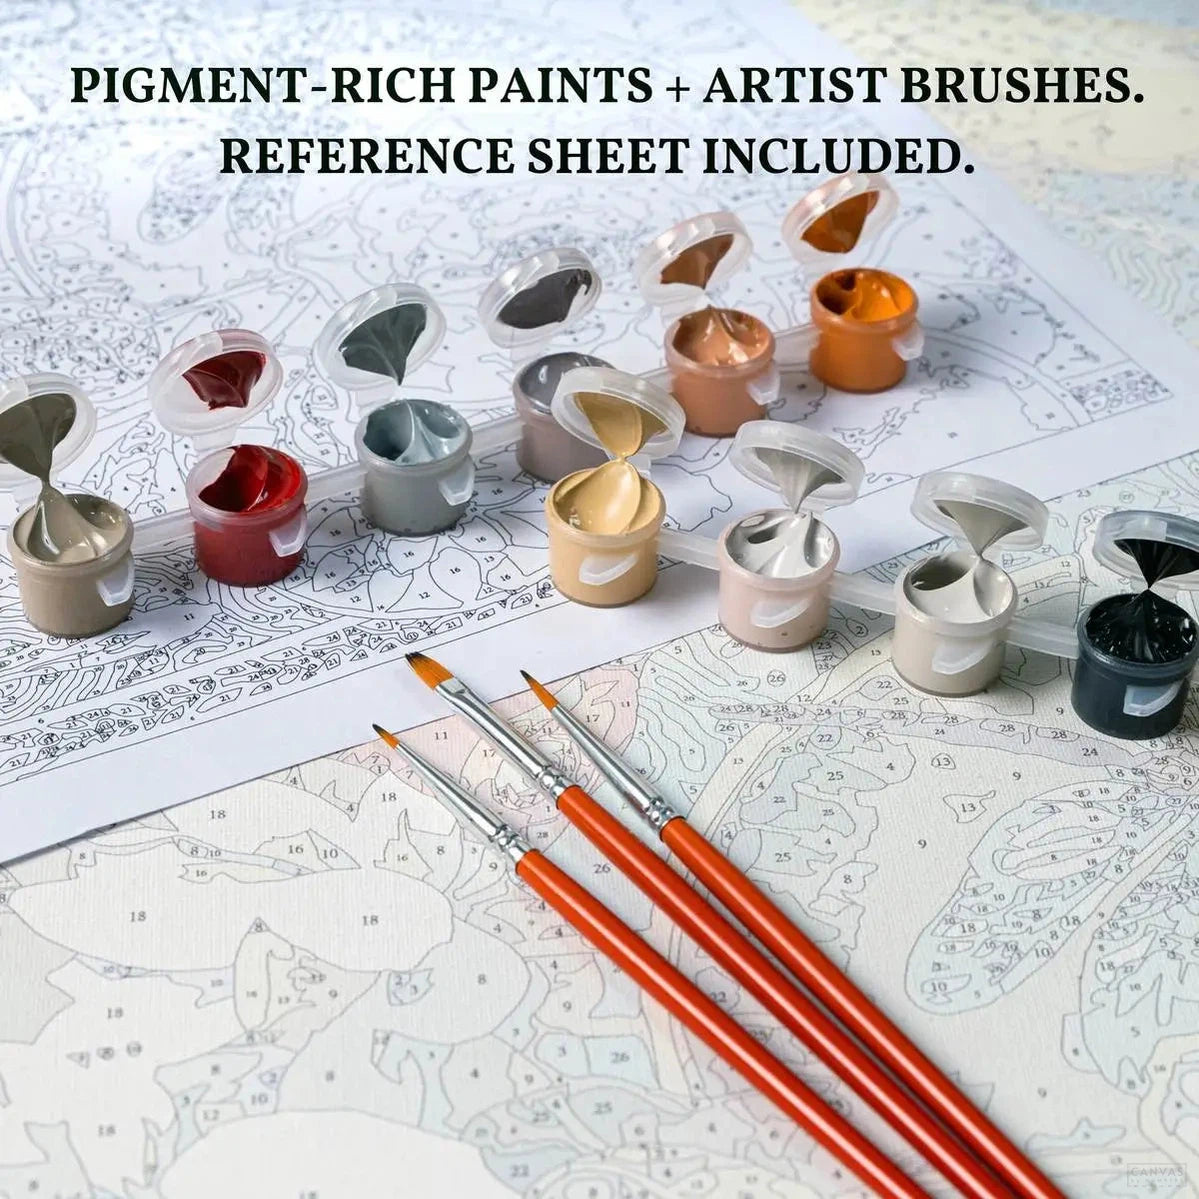 Balloon Flight - Paint by Numbers-Immerse yourself into Natalia's glasswork with this colorful paint by numbers. It's colors will cheer up any room! Shop quality kits at Canvas by Numbers.-Canvas by Numbers